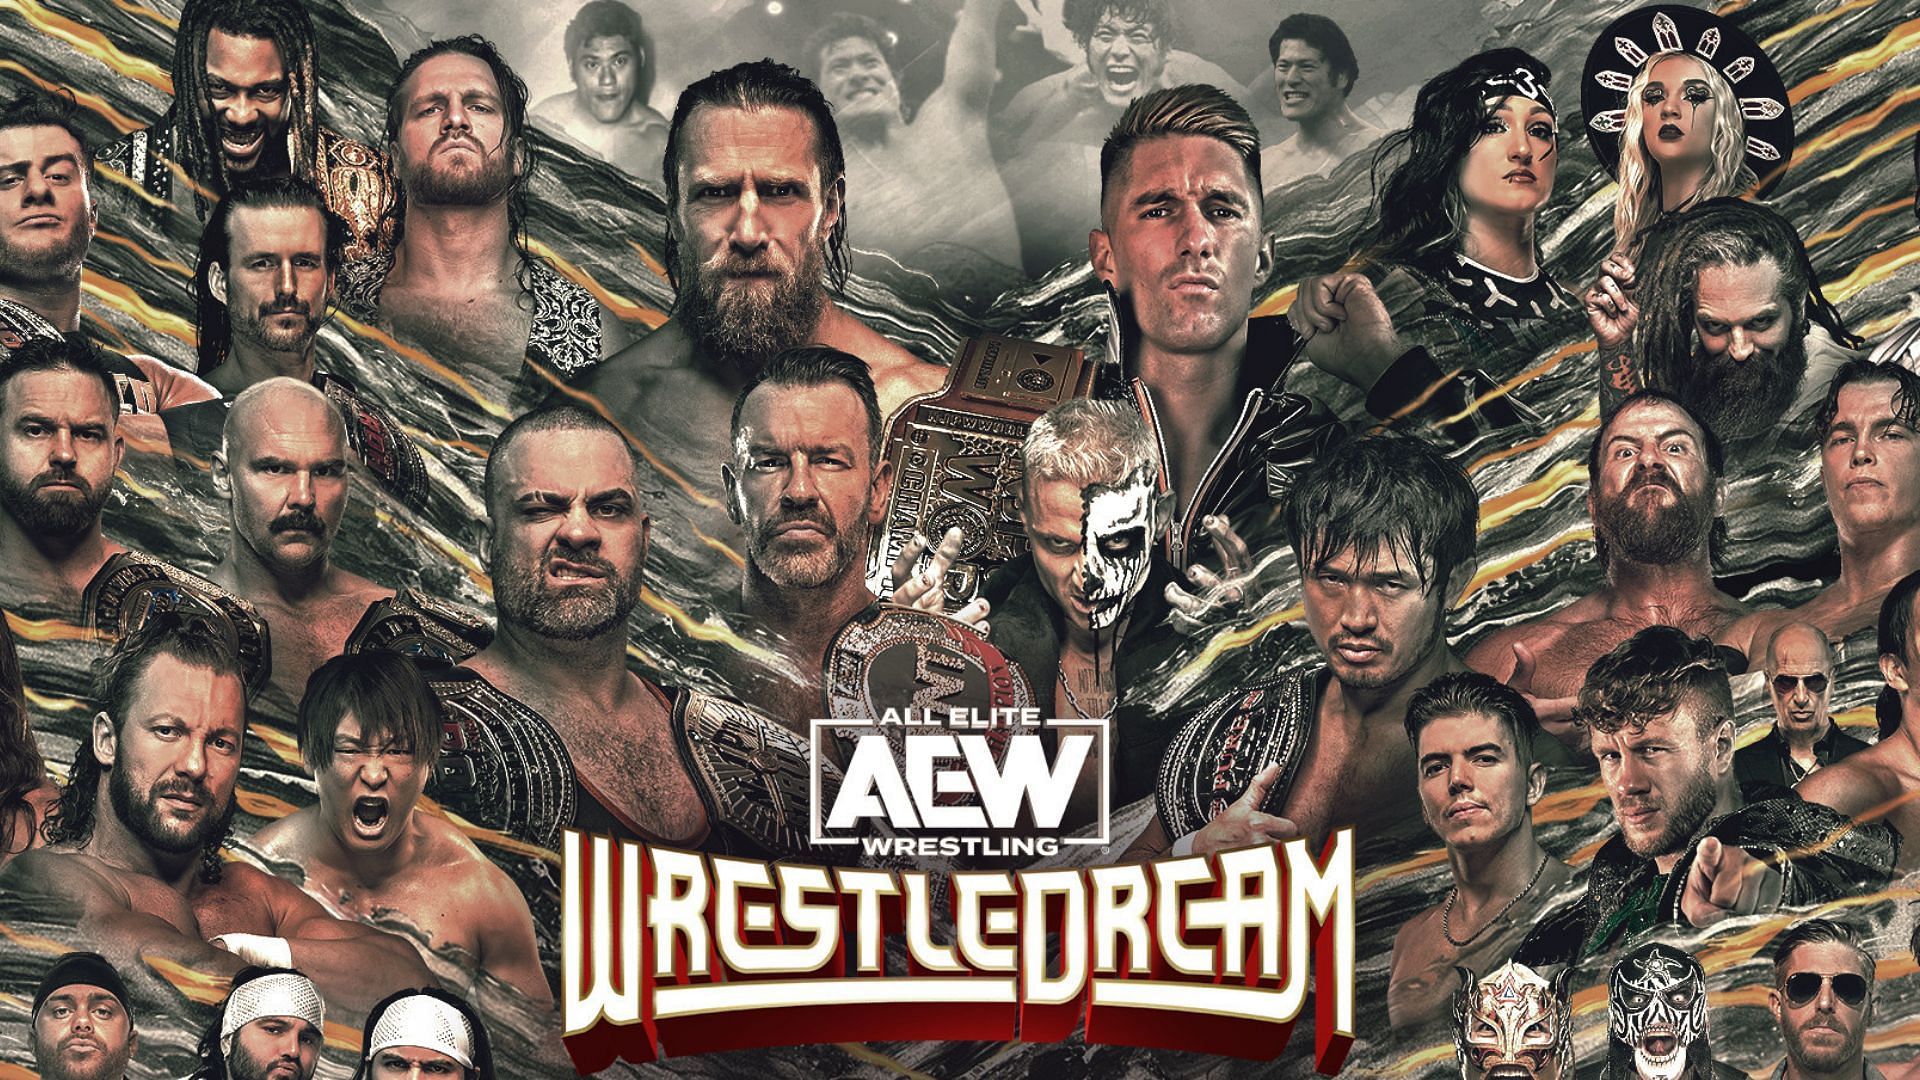 AEW WrestleDream takes place this Sunday!